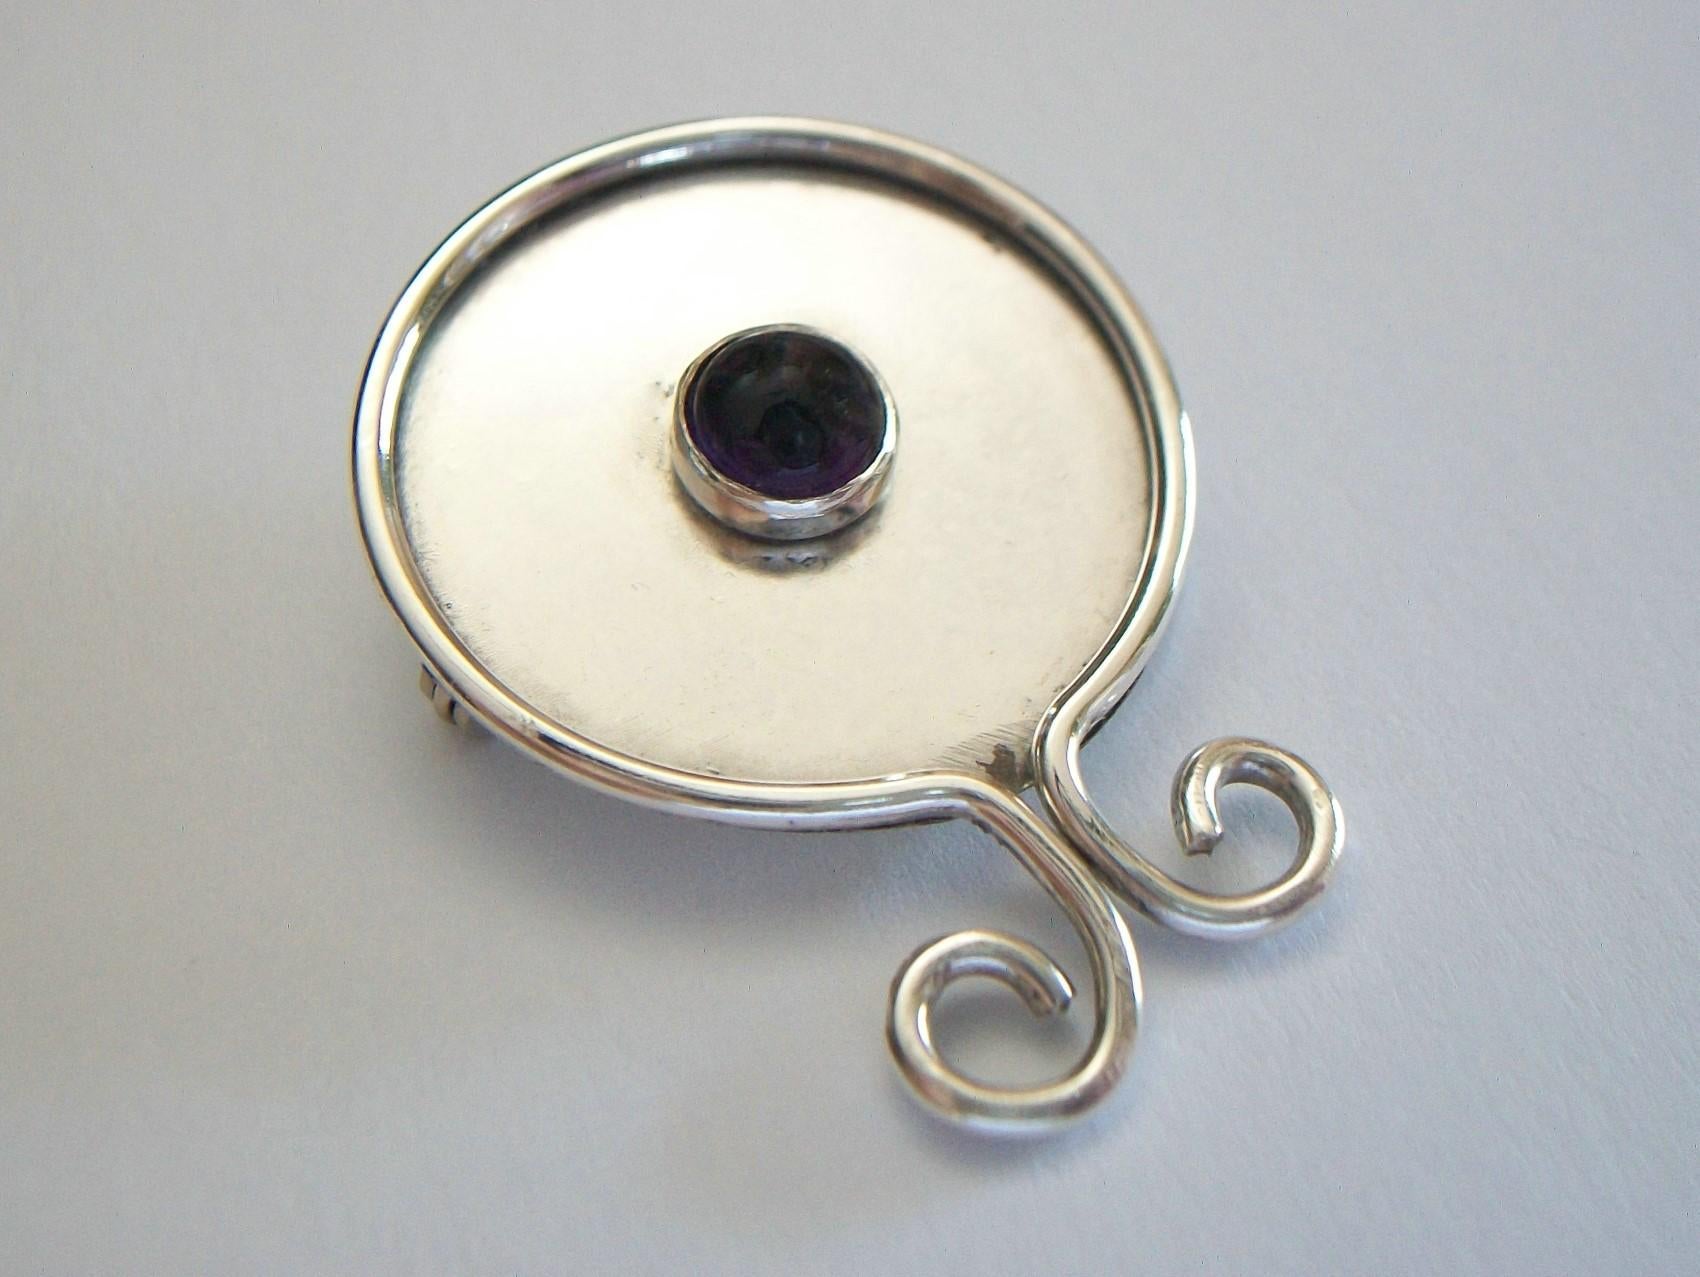 Modernist White Metal and Round Cabochon Amethyst Brooch, Unsigned, circa 1980s For Sale 1